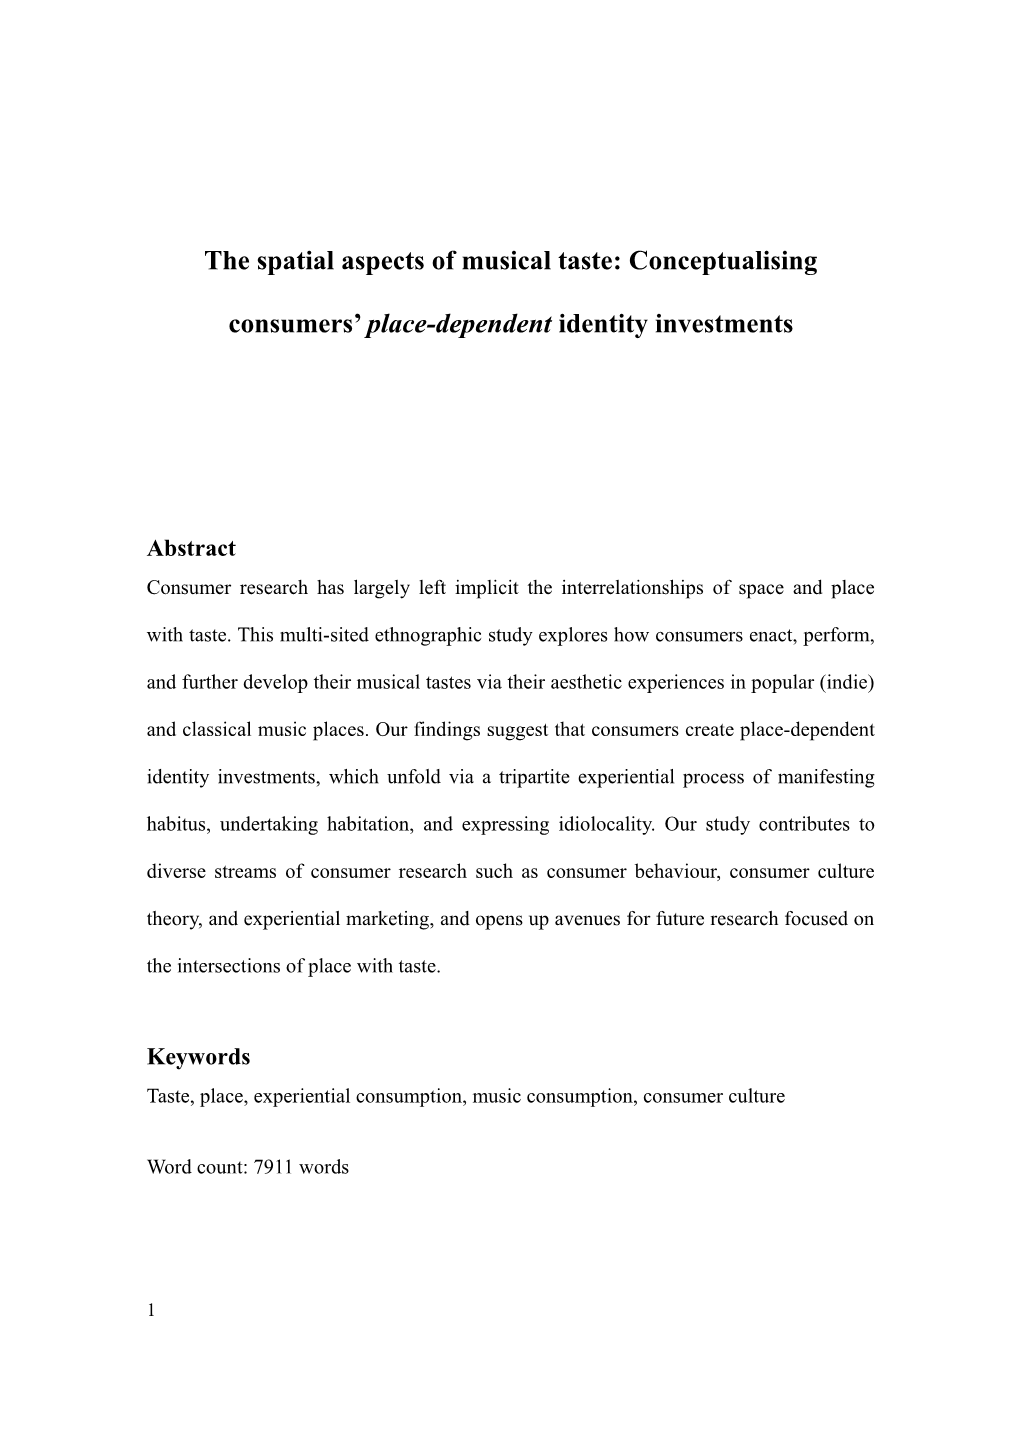 The Spatial Aspects of Musical Taste: Conceptualising Consumers Place-Dependent Identity